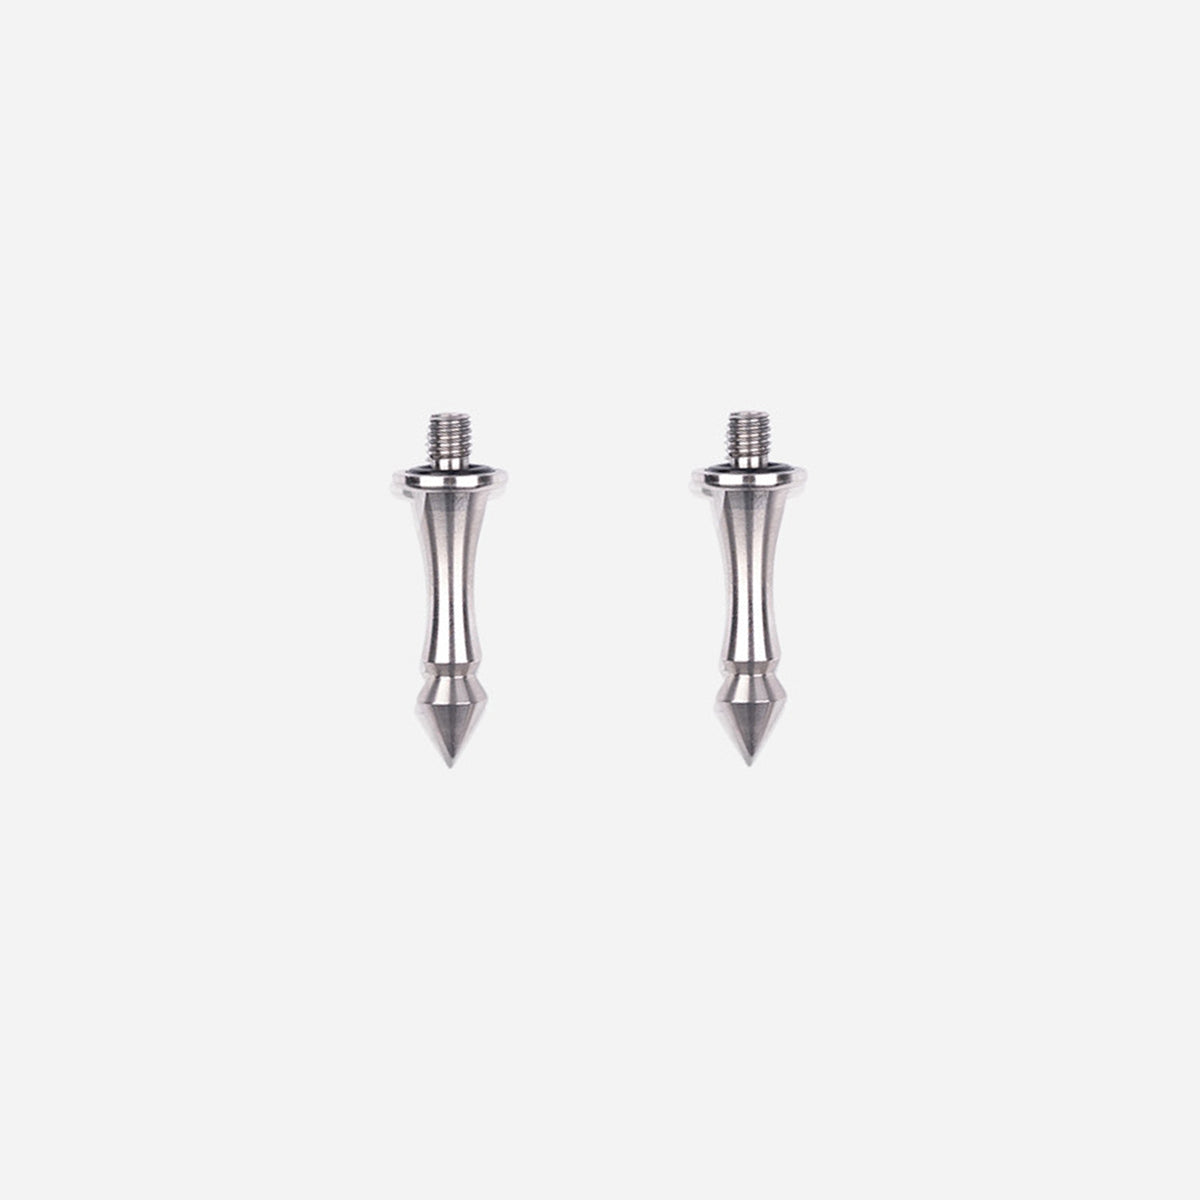 Stainless Steel Spikes (pk/3)